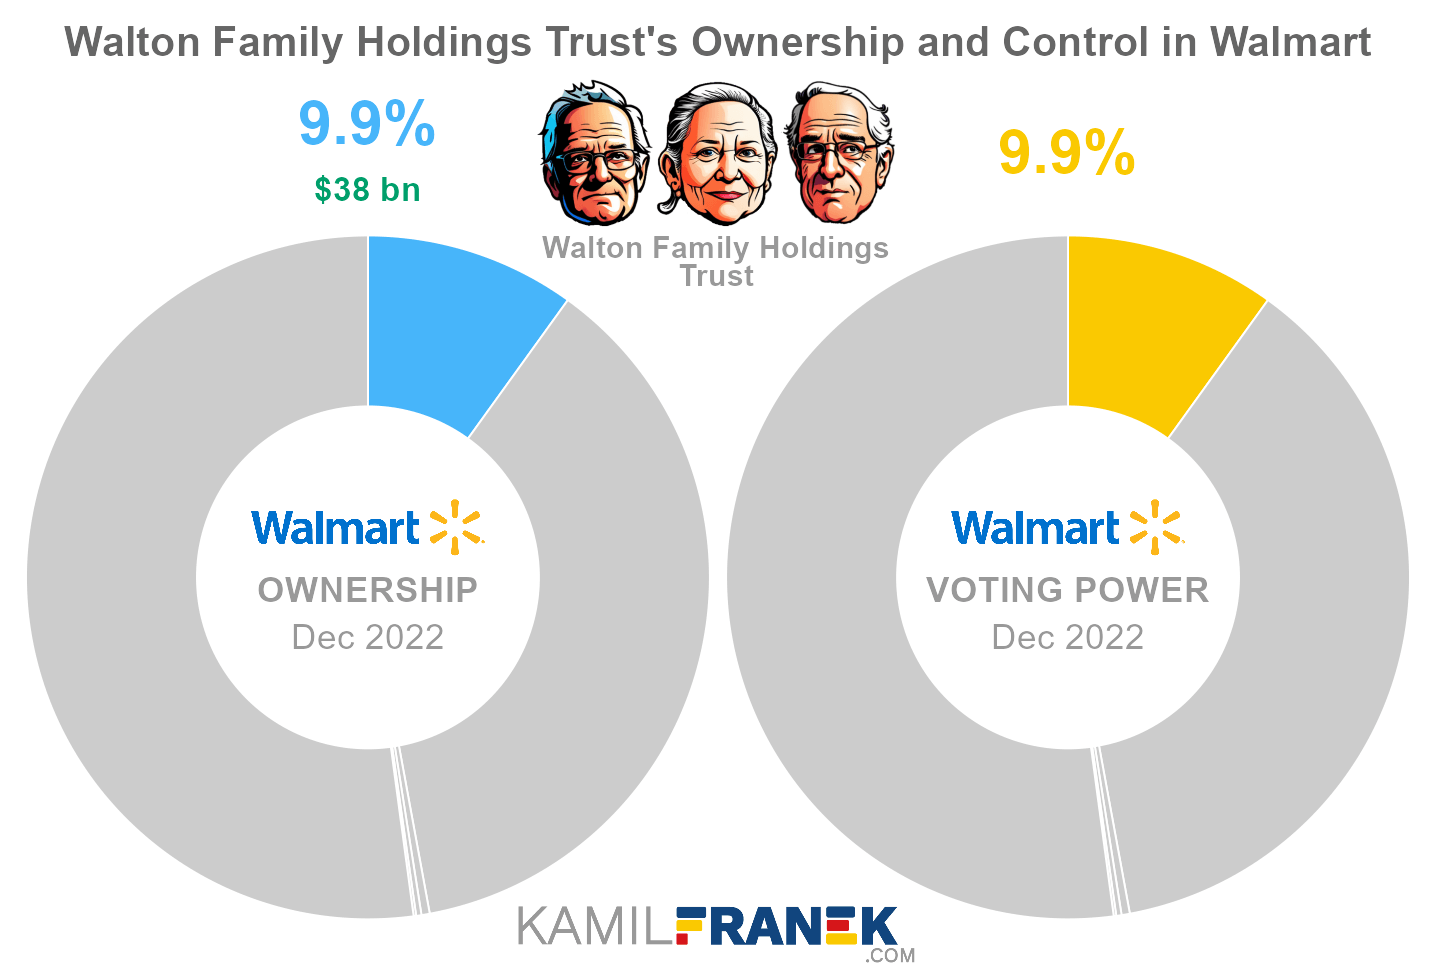 Walton Family Holdings Trust's share ownership and voting power in Walmart (chart)